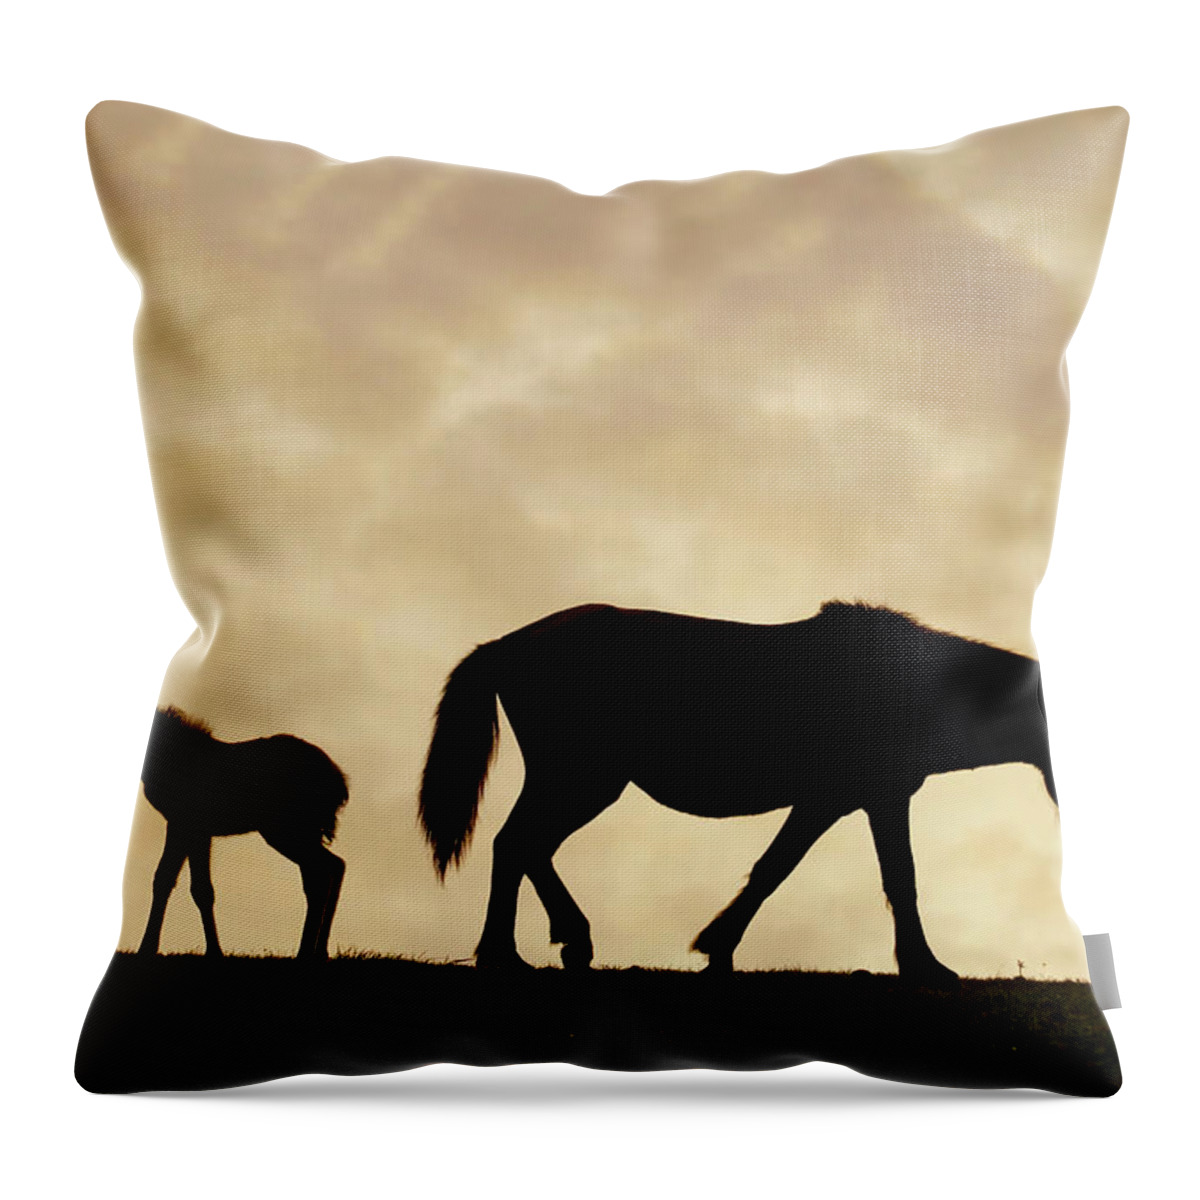 00648206 Throw Pillow featuring the photograph Miskai Horse Mare And Foal At Sunset by Hiroya Minakuchi